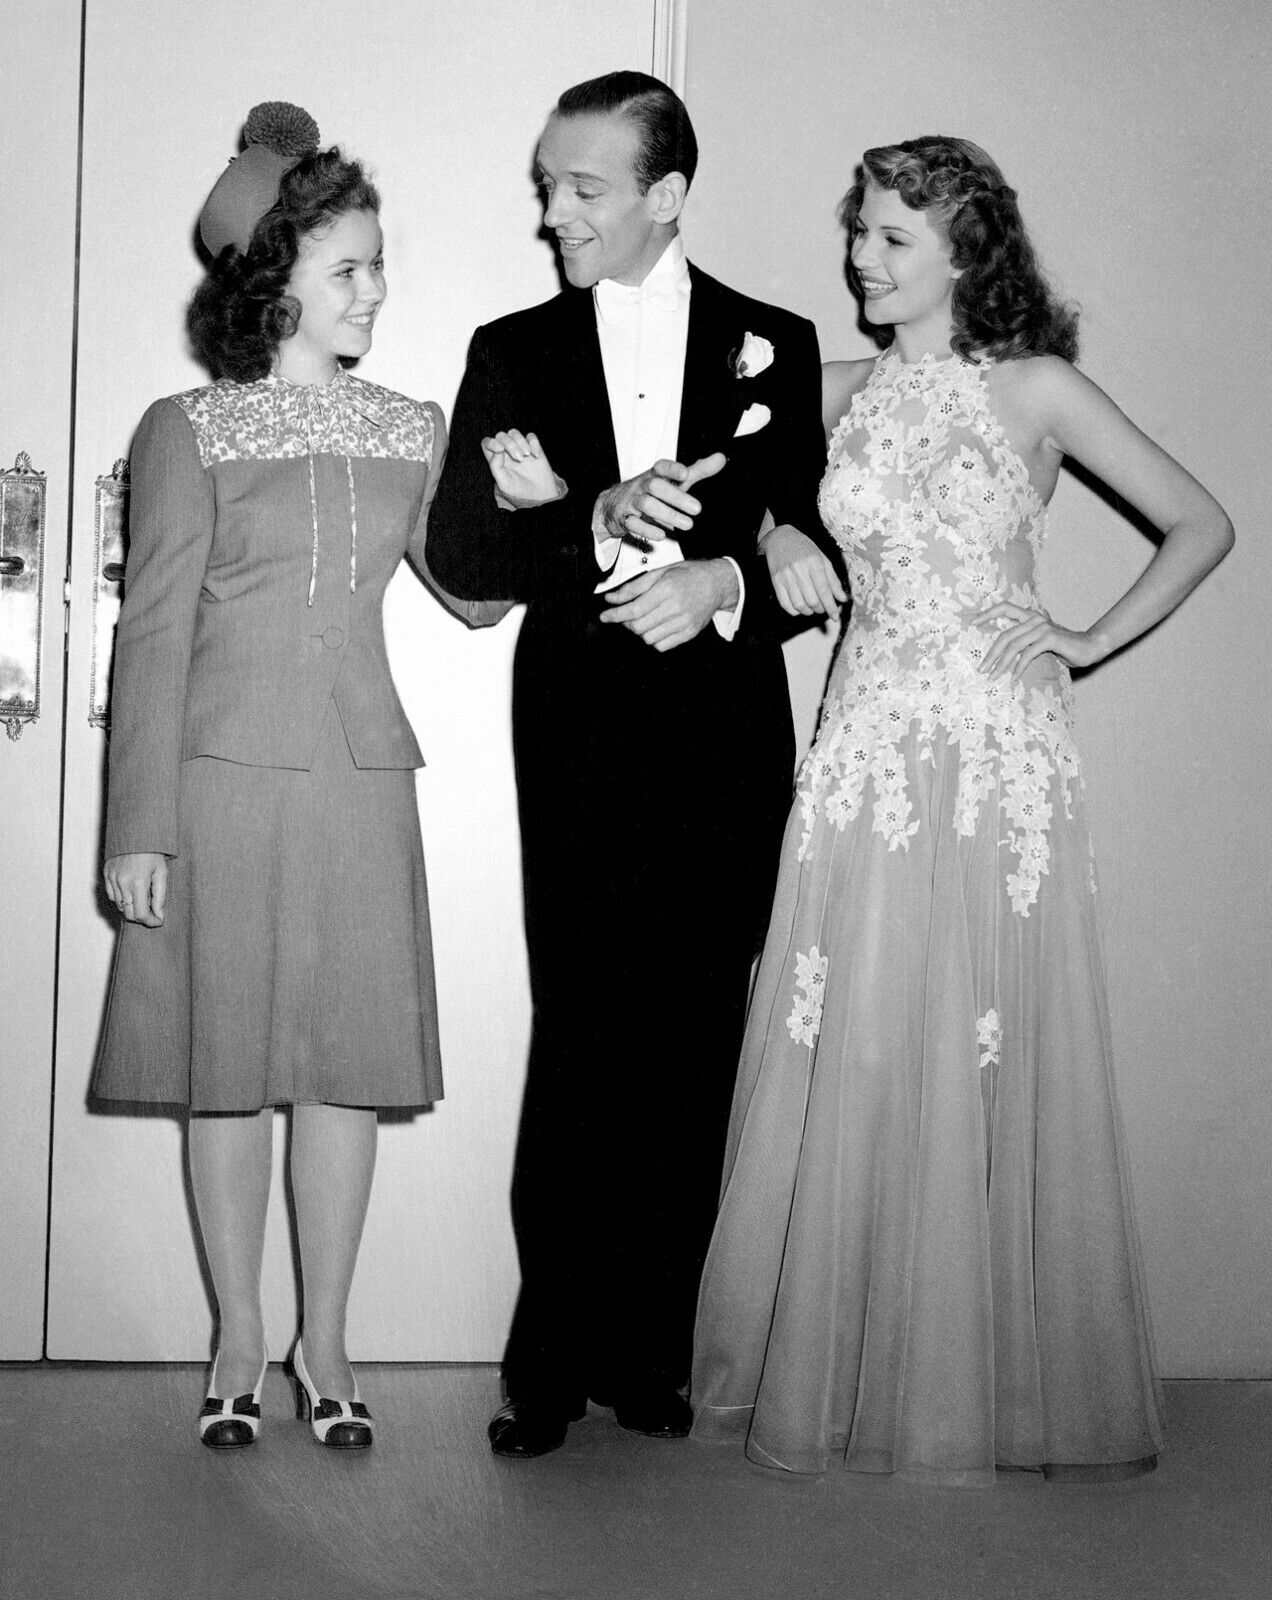 SHIRLEY TEMPLE FRED ASTAIRE RITA HAYWORTH 5x7 Glossy Photo